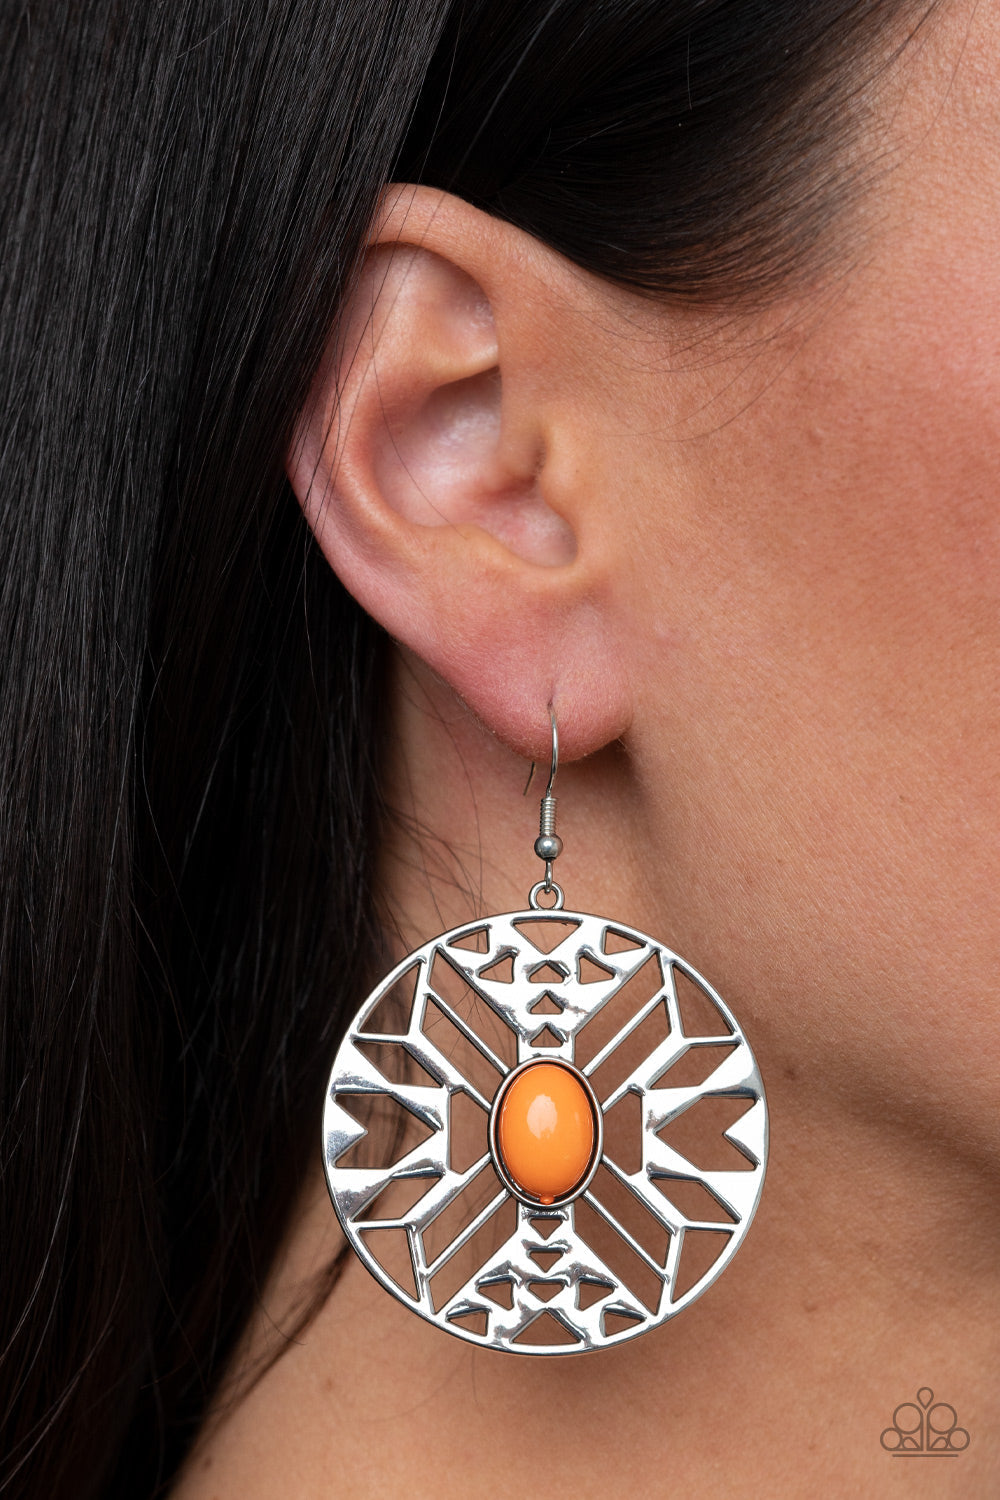 Southwest Walkabout - Orange and Silver Earrings - Paparazzi Accessories - An oval Amberglow bead adorns the center of a round silver frame radiating with an airy southwestern inspired pattern for a whimsical look. Earring attaches to a standard fishhook fitting. Sold as one pair of earrings.